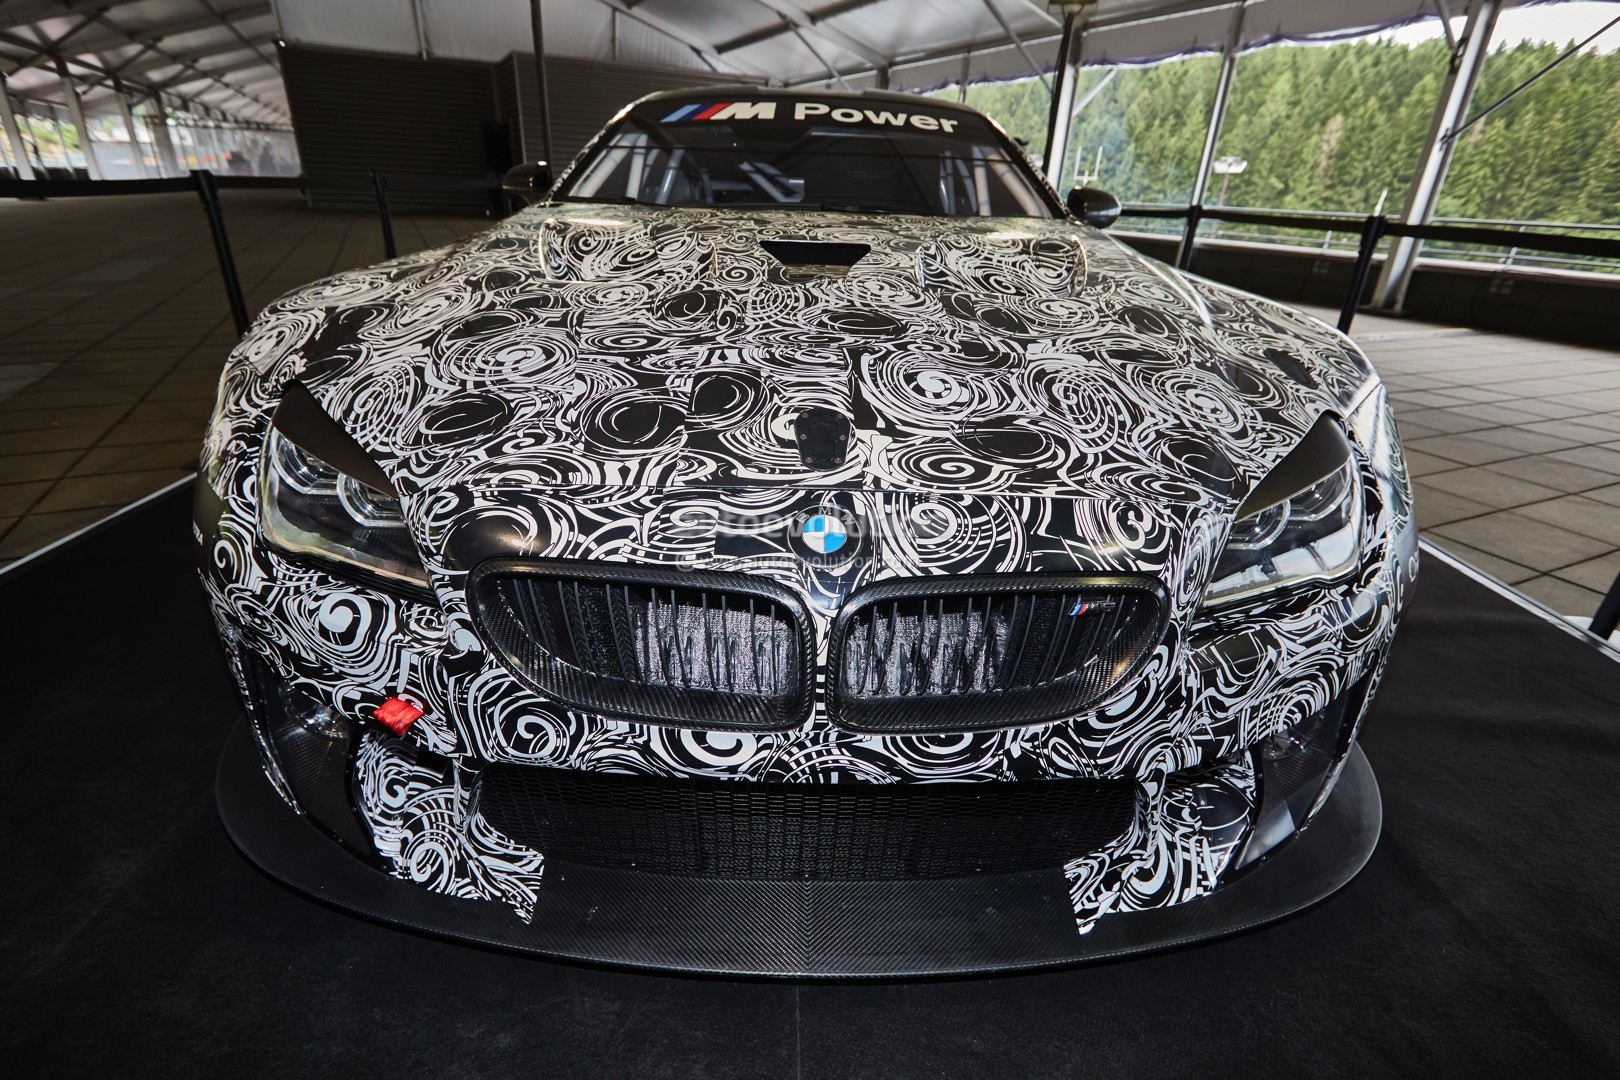 2016-bmw-m6-gt3-caught-on-camera-at-the-spa-francorchamps-24-hour-race-photo-gallery_21